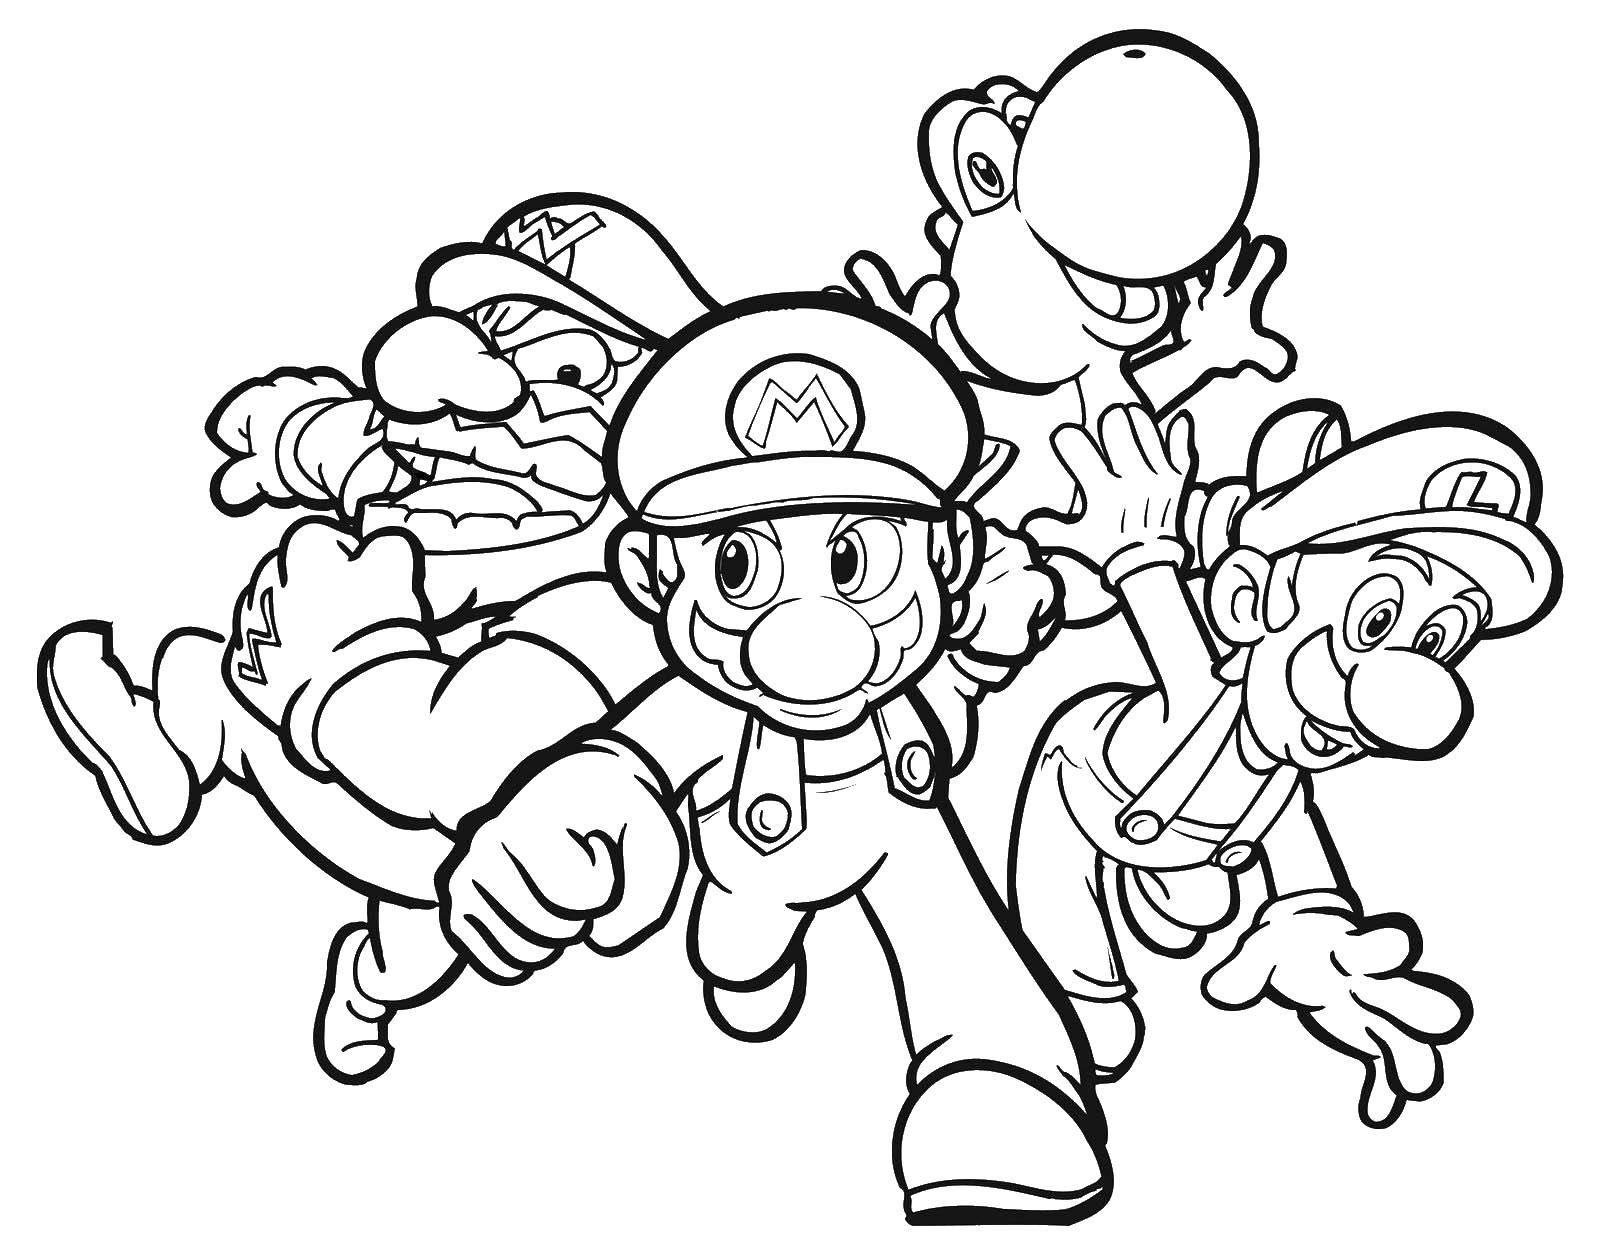 Coloring Mario, wario, Dino and Luigi. Category The character from the game. Tags:  Games, Mario.